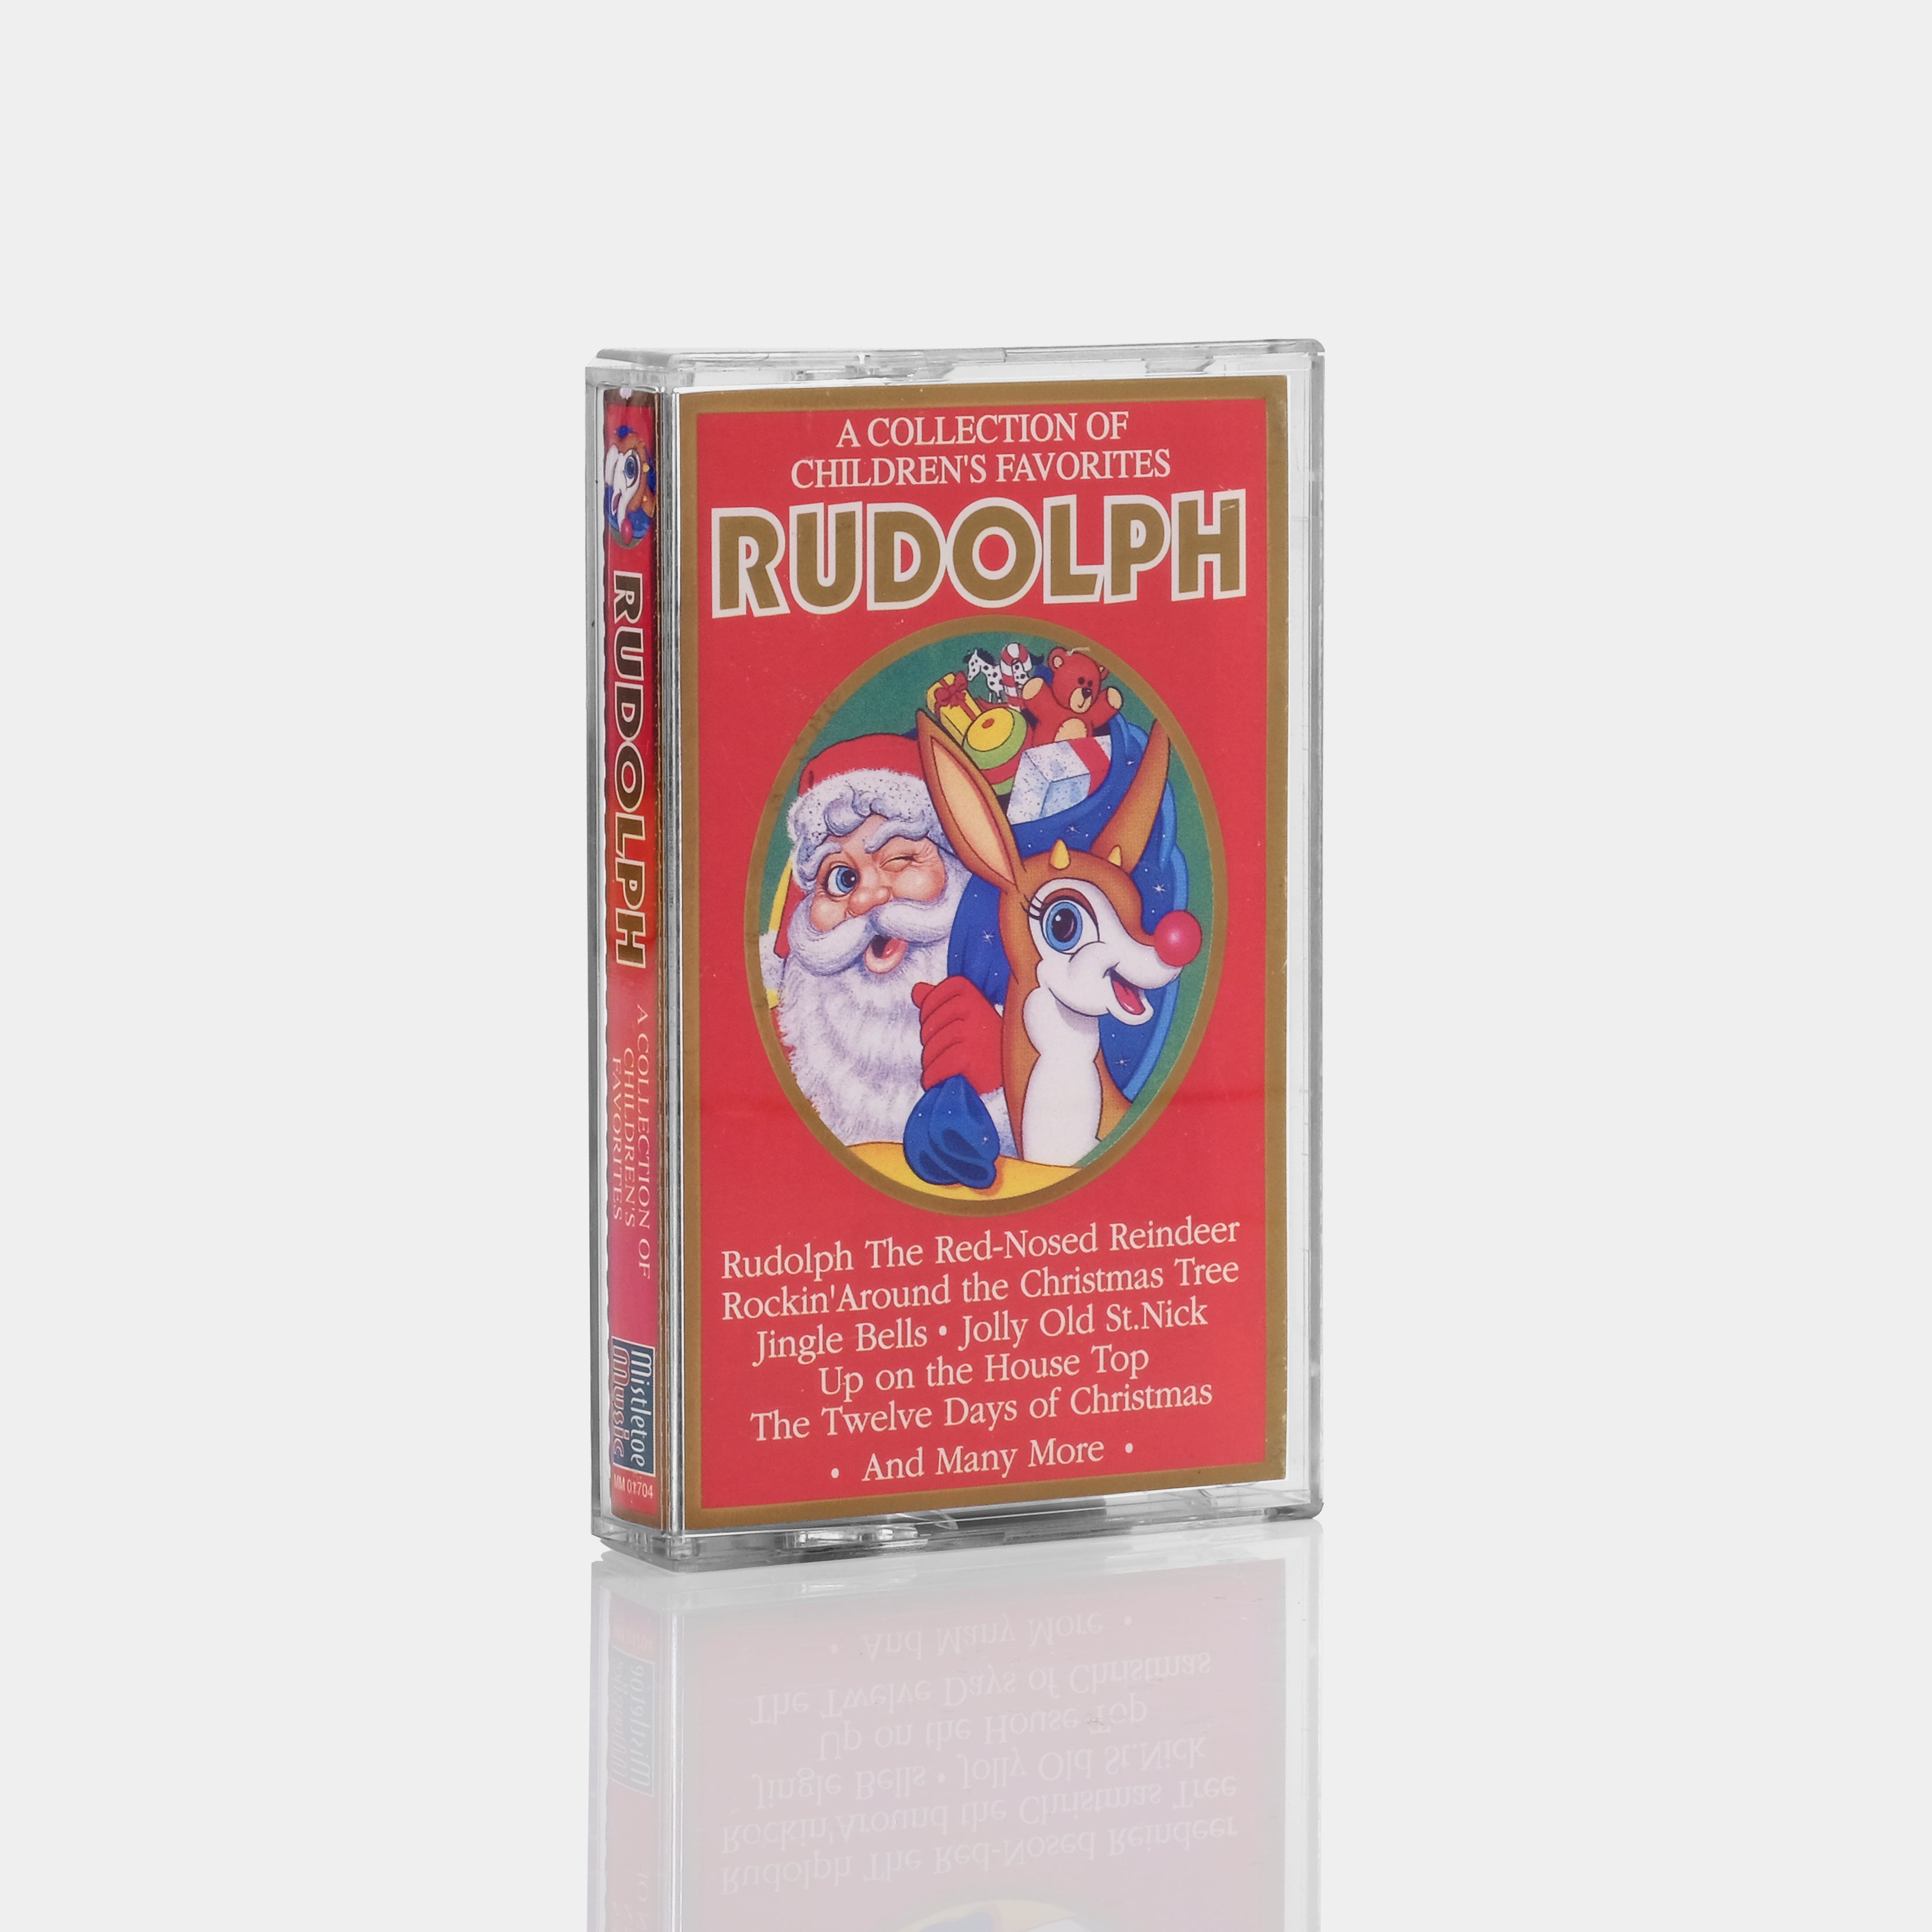 Rudolph: A Collection Of Children's Favorites Cassette Tape